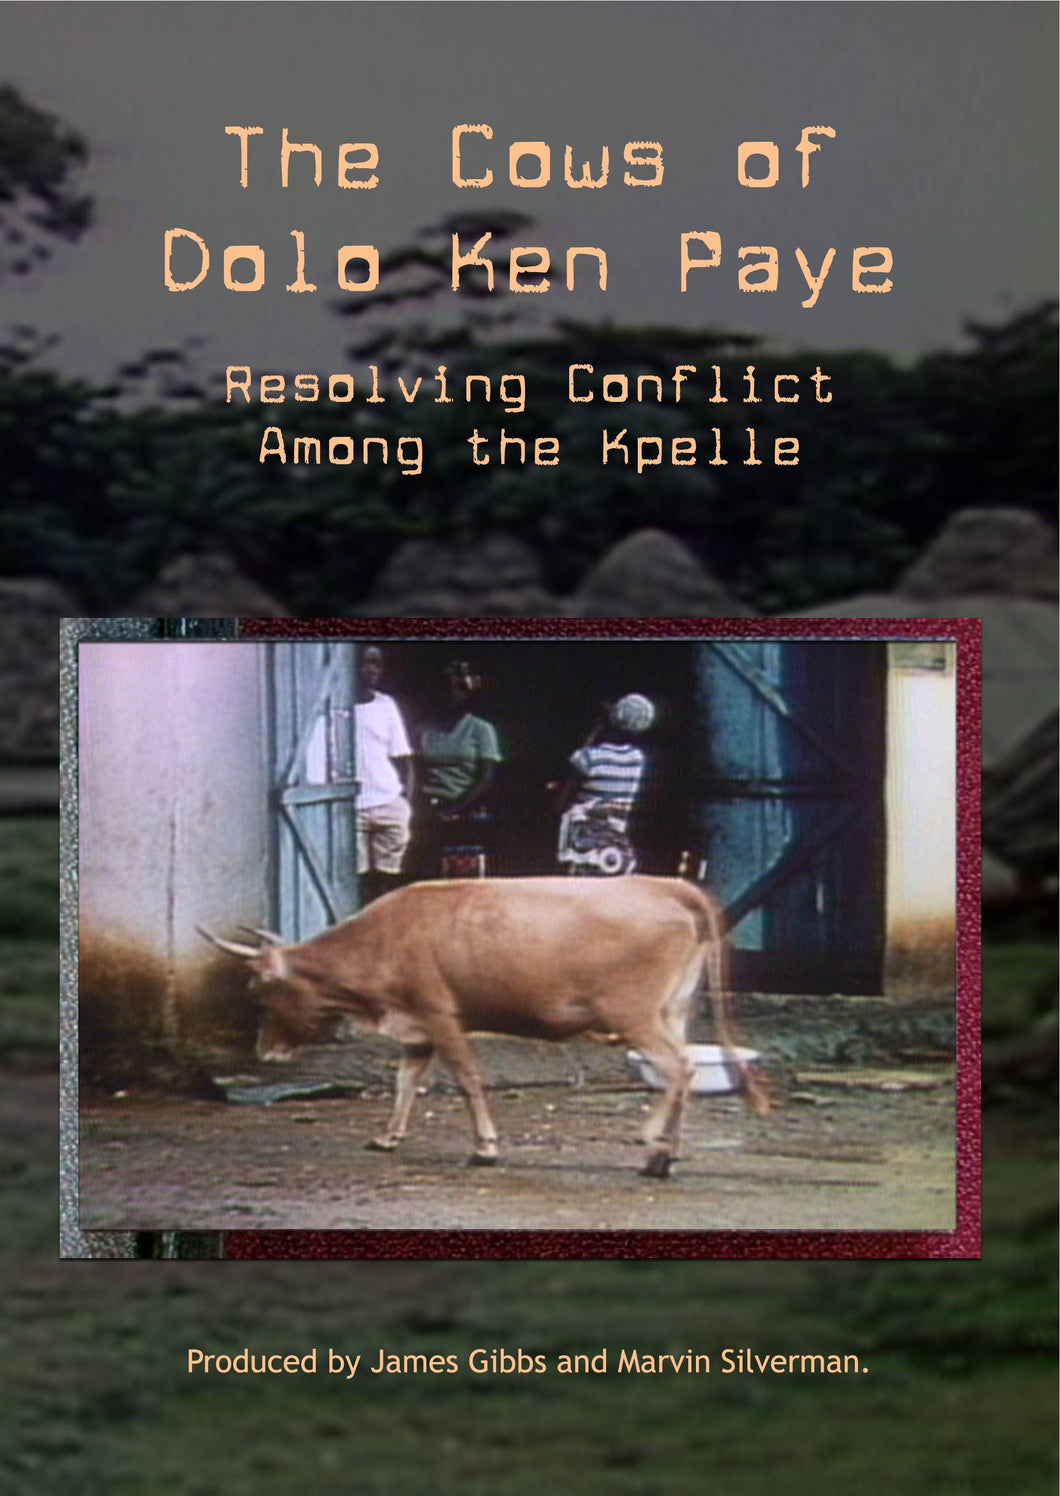 Cows of Dolo Ken Paye:  Resolving Conflict Among the Kpelle